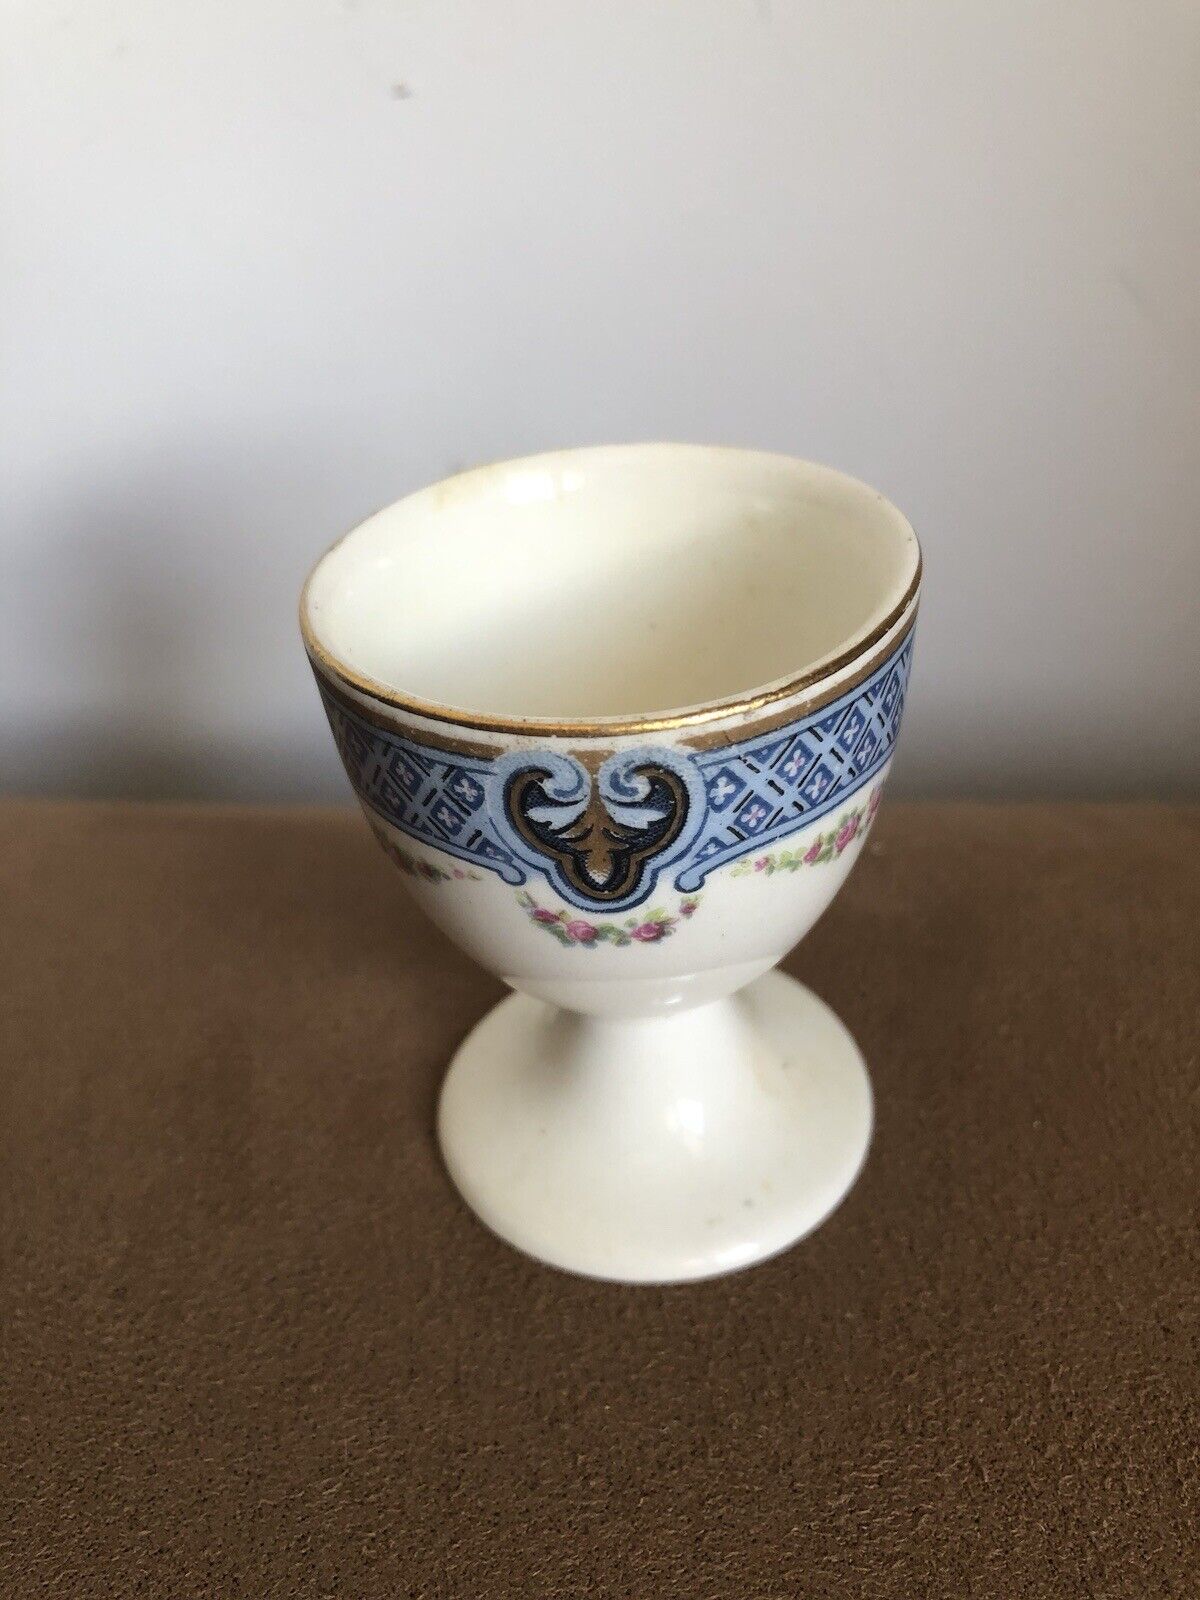 Antique/Vintage Egg Cup From England Bone China Gold Trim Pink Floral With Blue